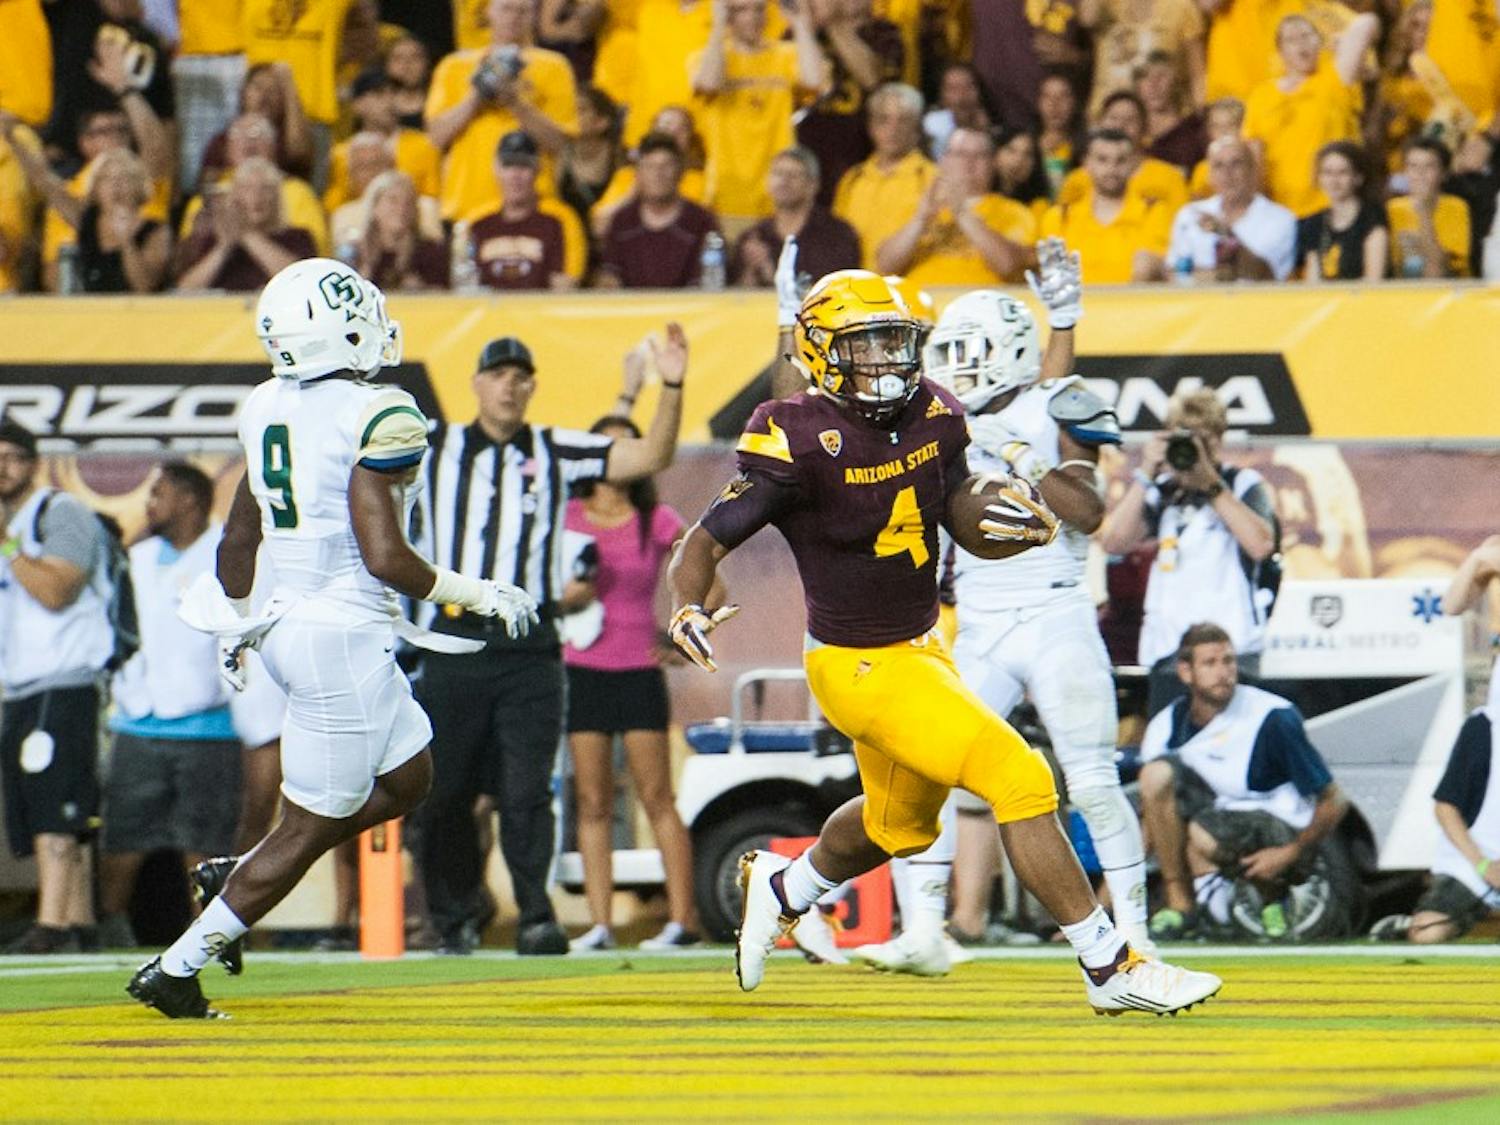 Photos: Arizona State University finds redemption in 35-21 win over Cal Poly